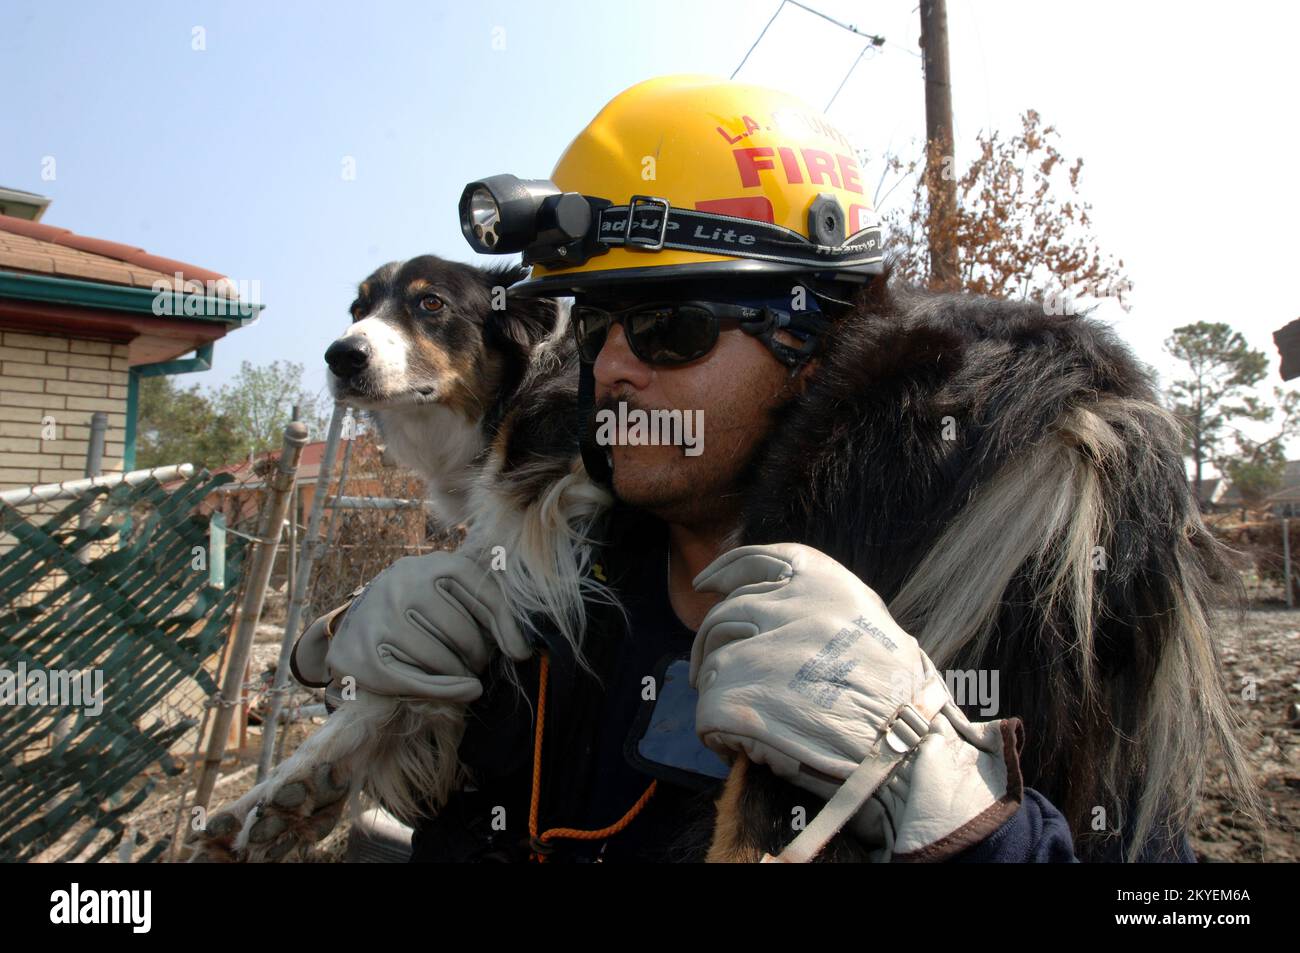 Hurricane Katrina, New Orleans, LA, September 19, 2005 -- A FEMA Urban Search and Rescue Task Force member carries his dog over an area that is muddy in an area impacted by Hurricane Katrina. Jocelyn Augustino/FEMA Stock Photo